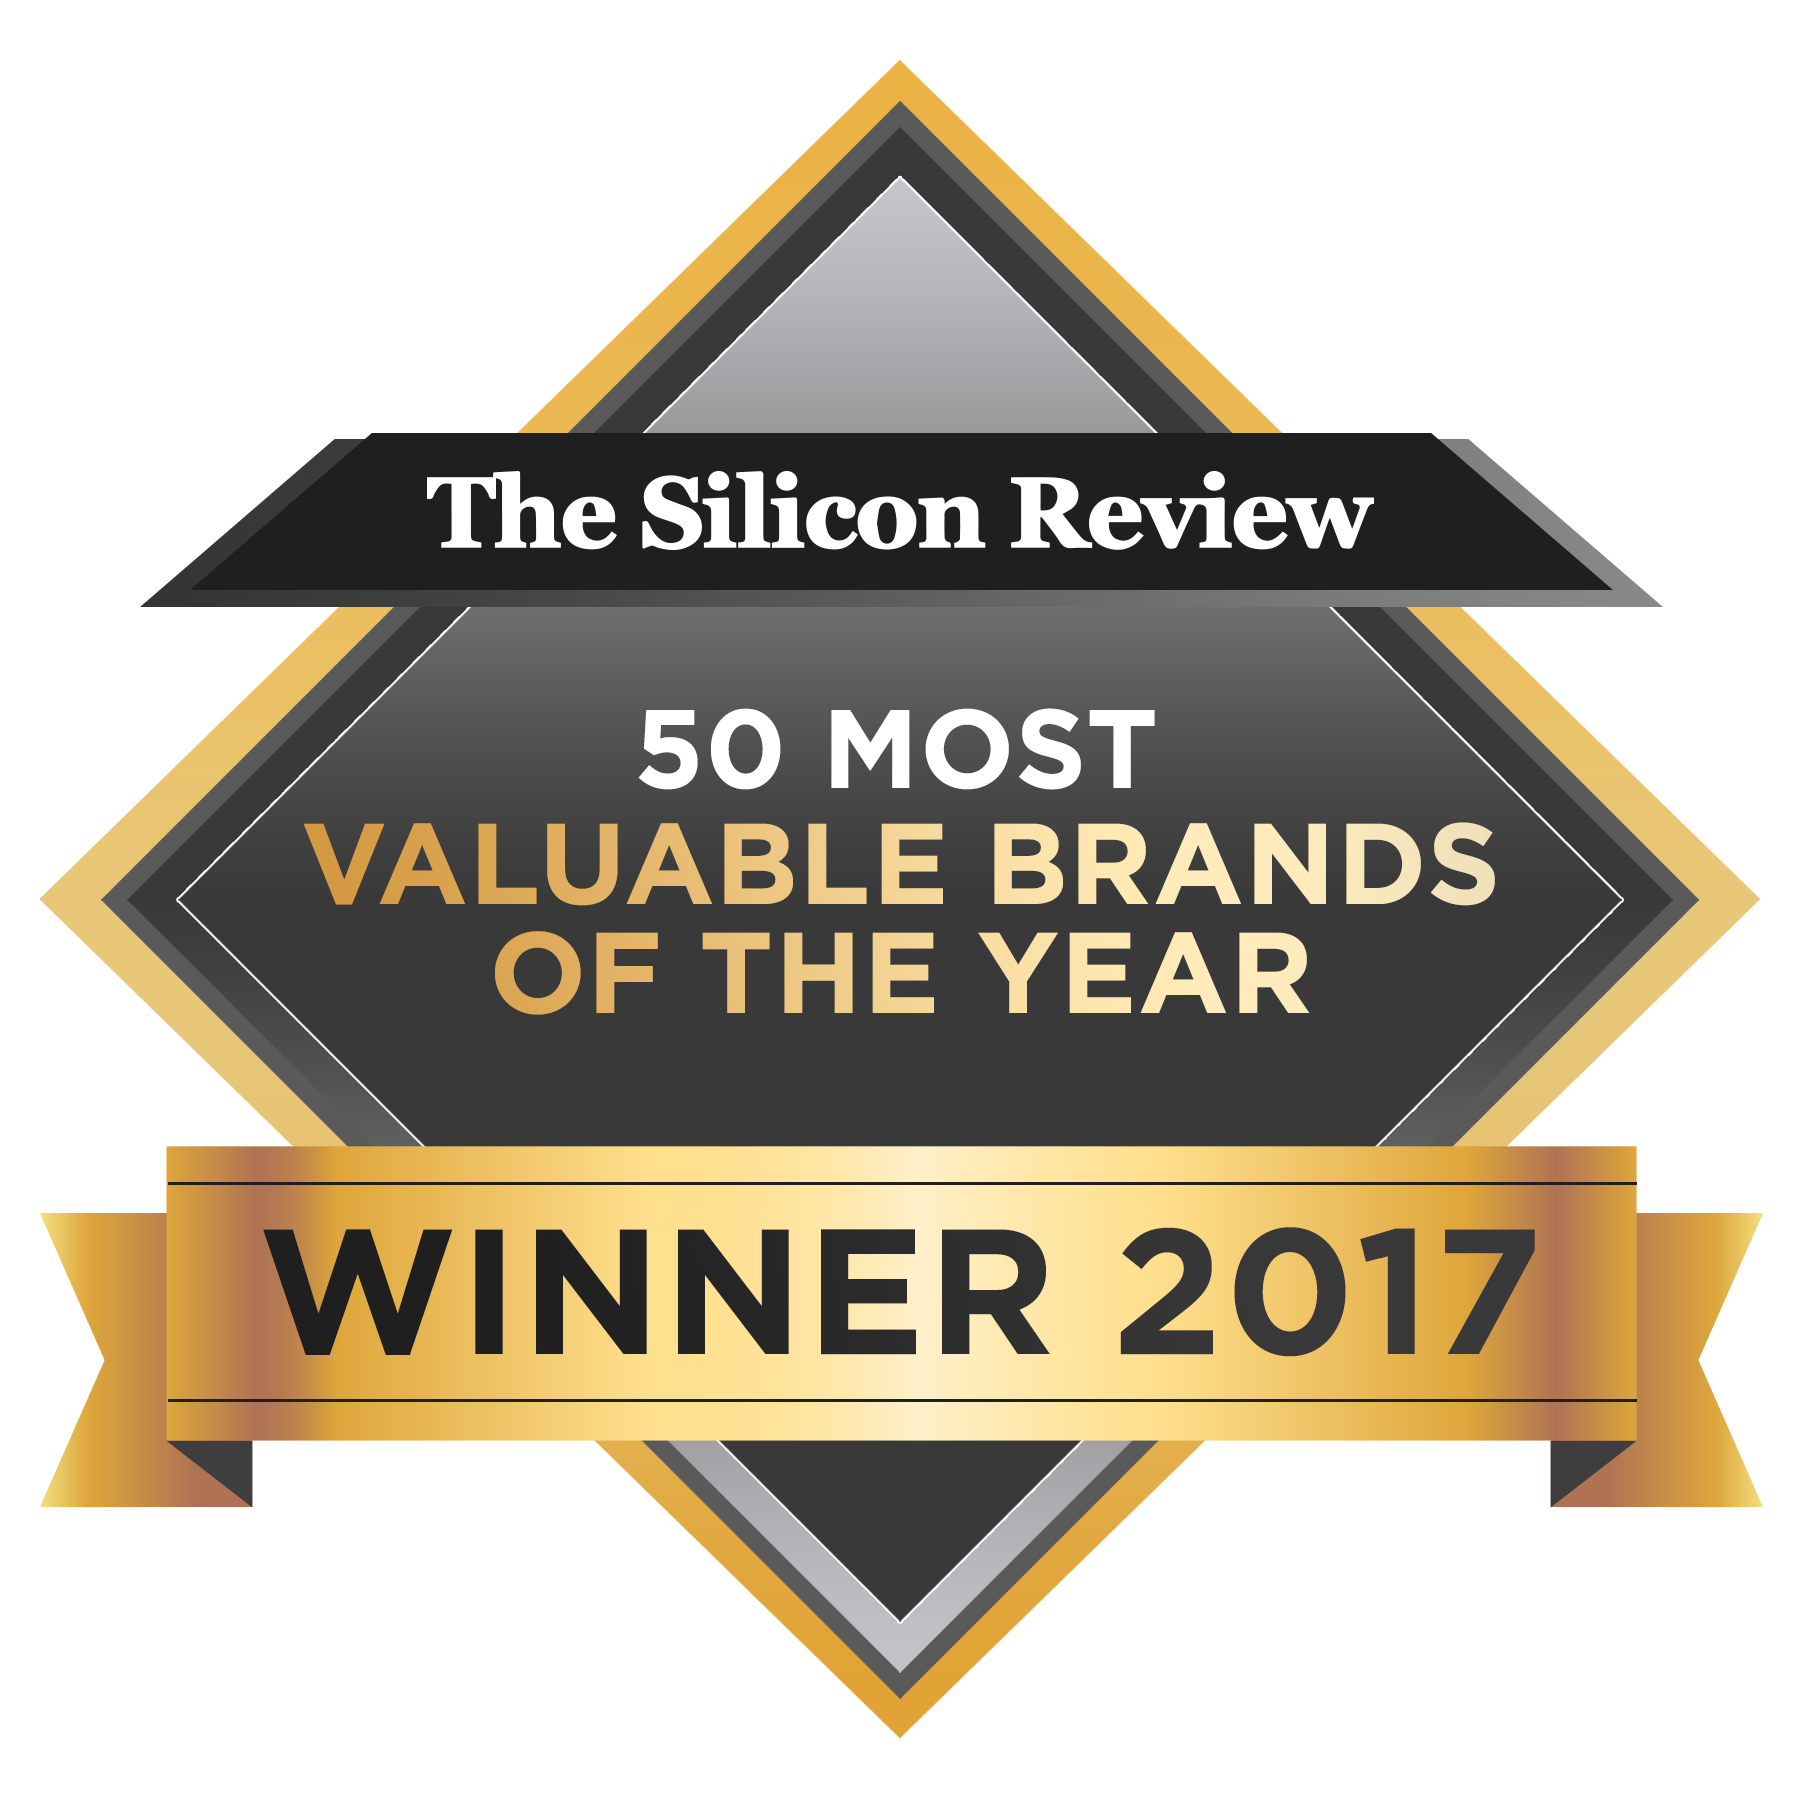 The Silicon Review 2017 Award for 50 Most Valuable Brands of the Year